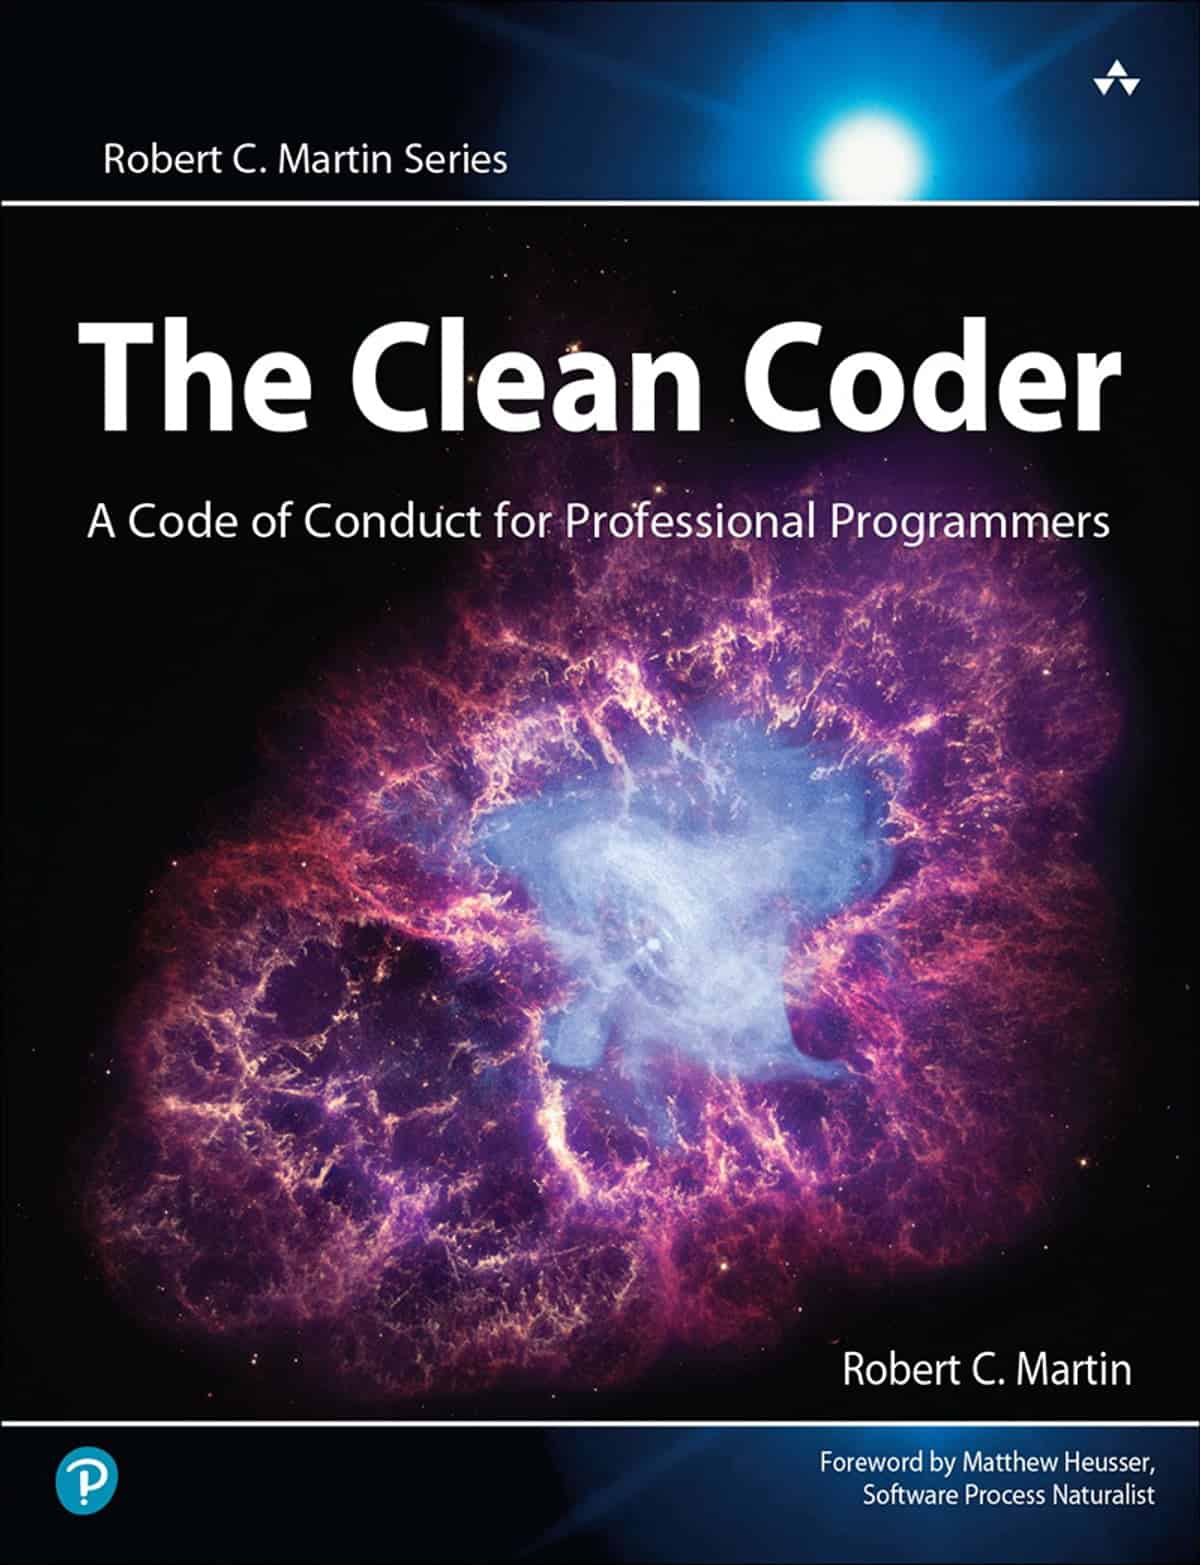 Book cover of "The Clean Coder: A Code of Conduct for Professional Programmers"